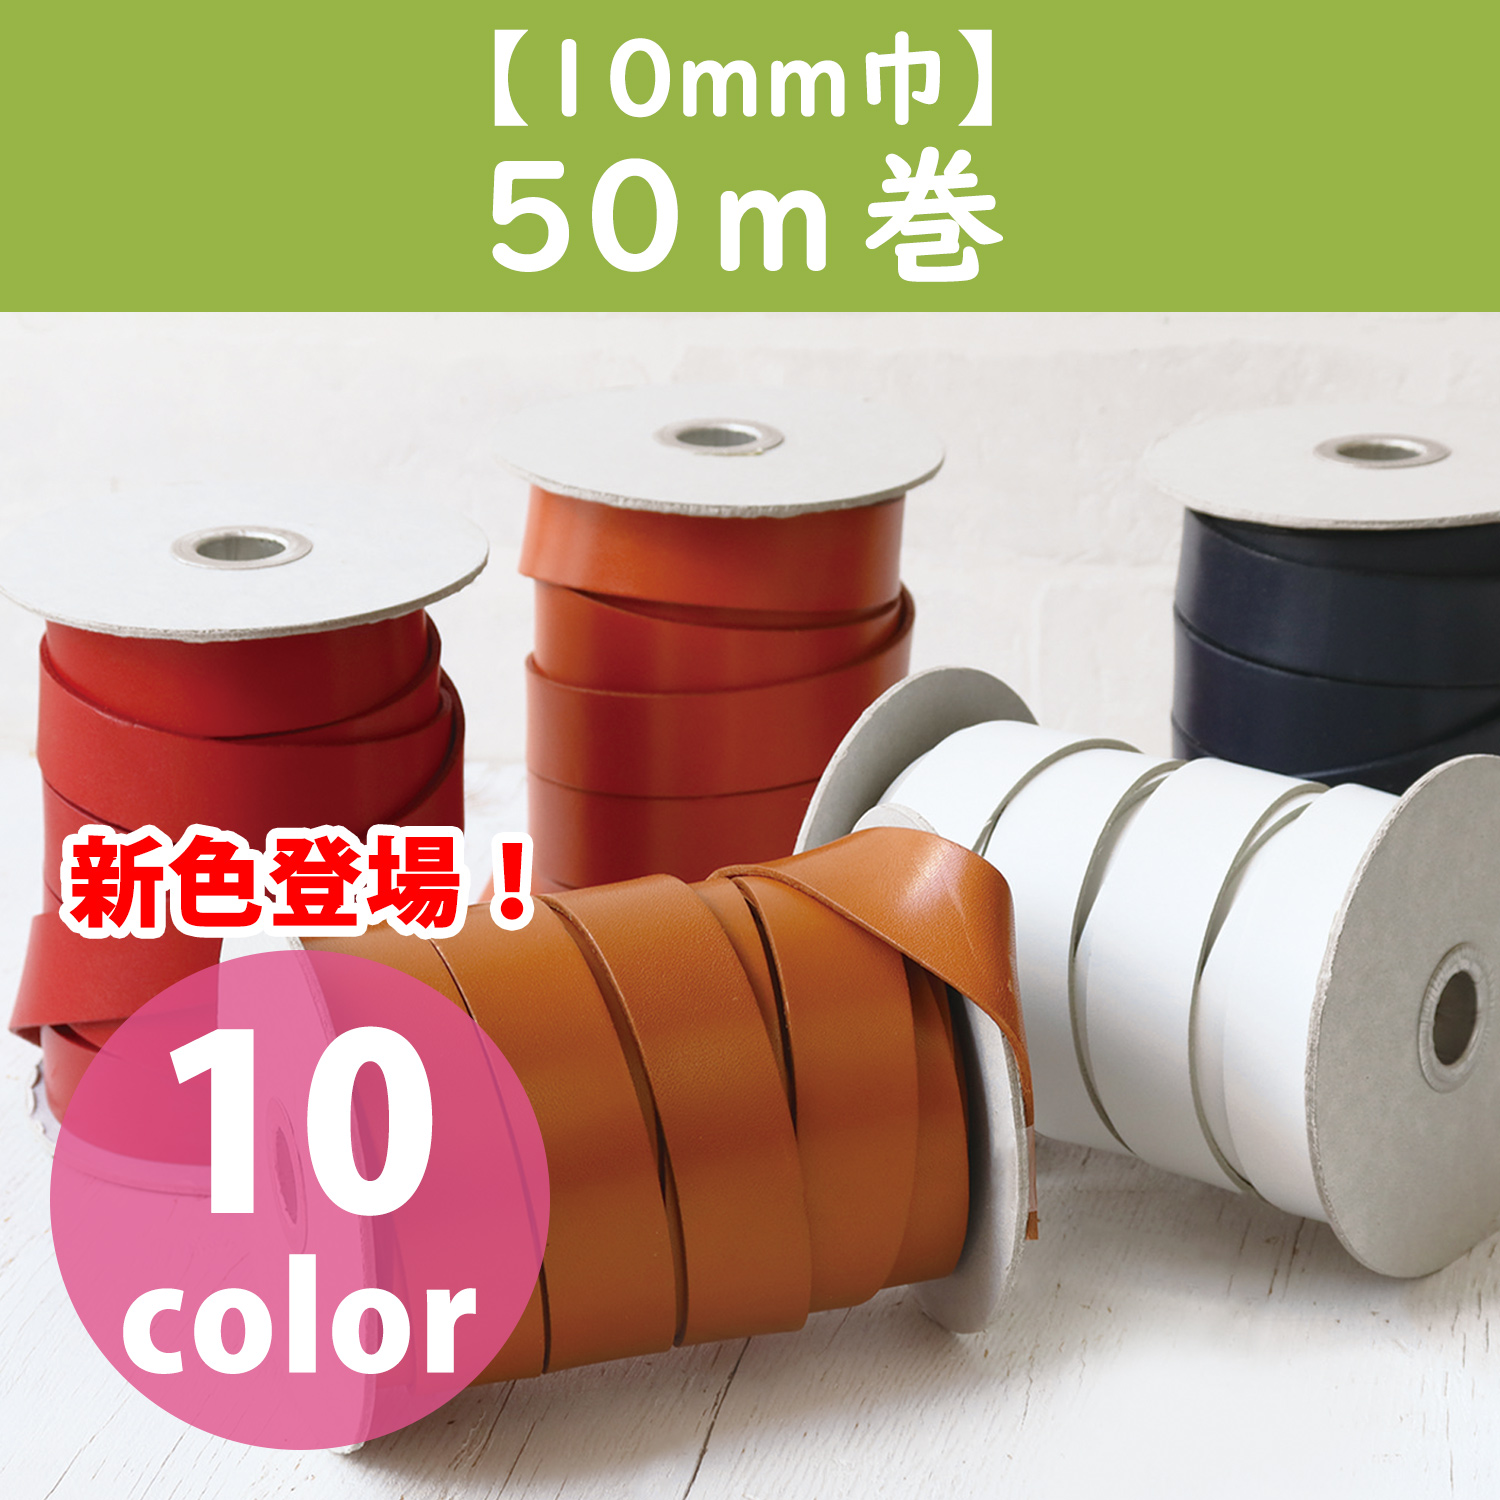 [Order upon demand"", not returnable]MTLS1010 Tanned Cow Hide Tape 10mm wide 50m (roll)